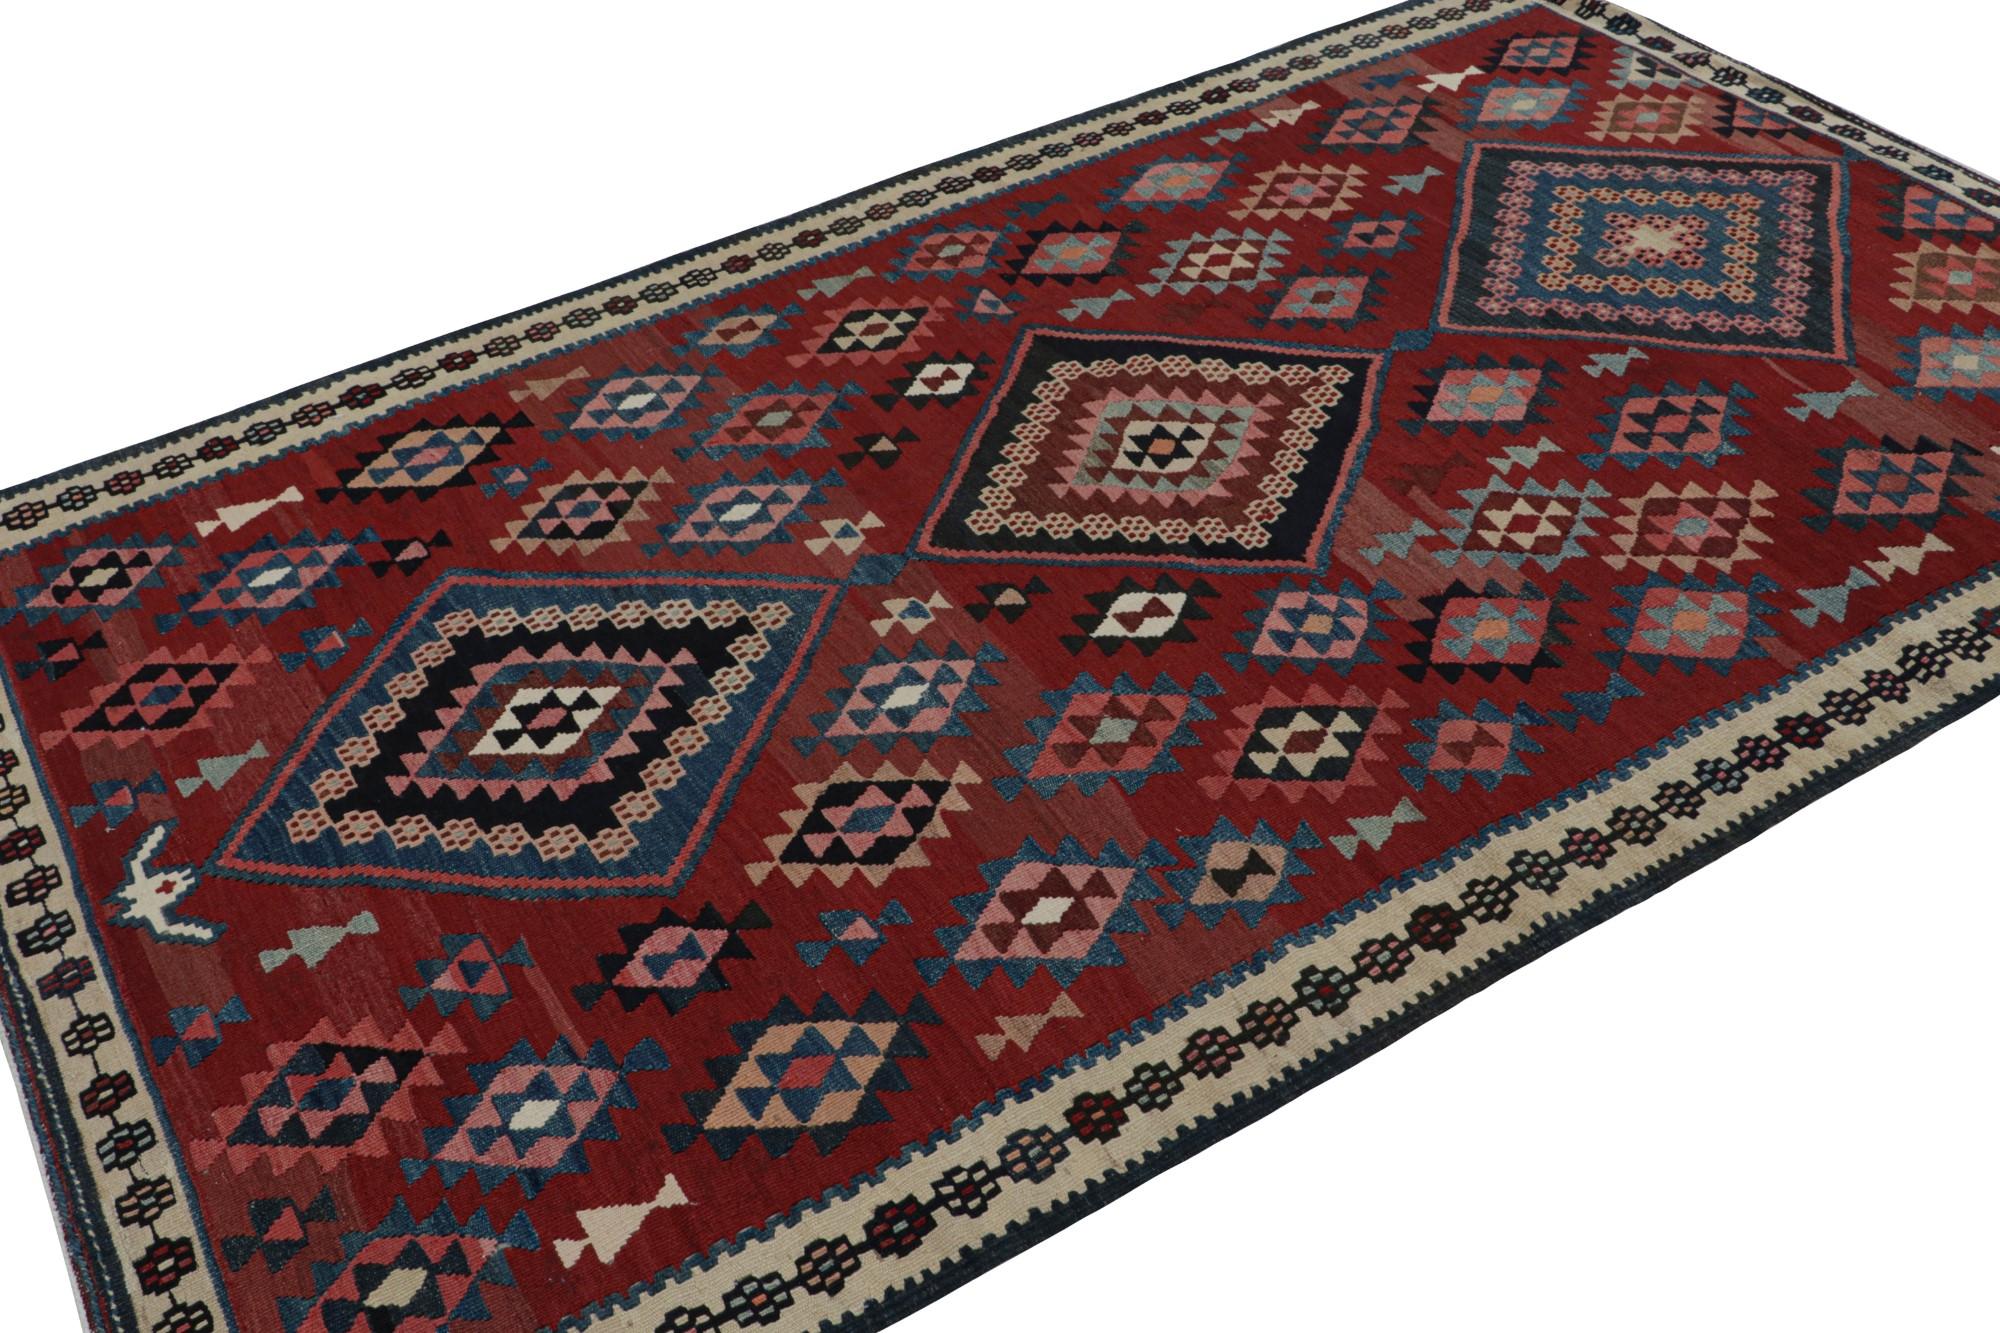 Hand knotted in wool, this 5x8 Baluch rug represents a new line of tribal carpets in the Modern Classics Collection by Rug & Kilim. Each piece  represents the work of women weavers in Afghanistan, preserving the rich tradition of their centuries-old